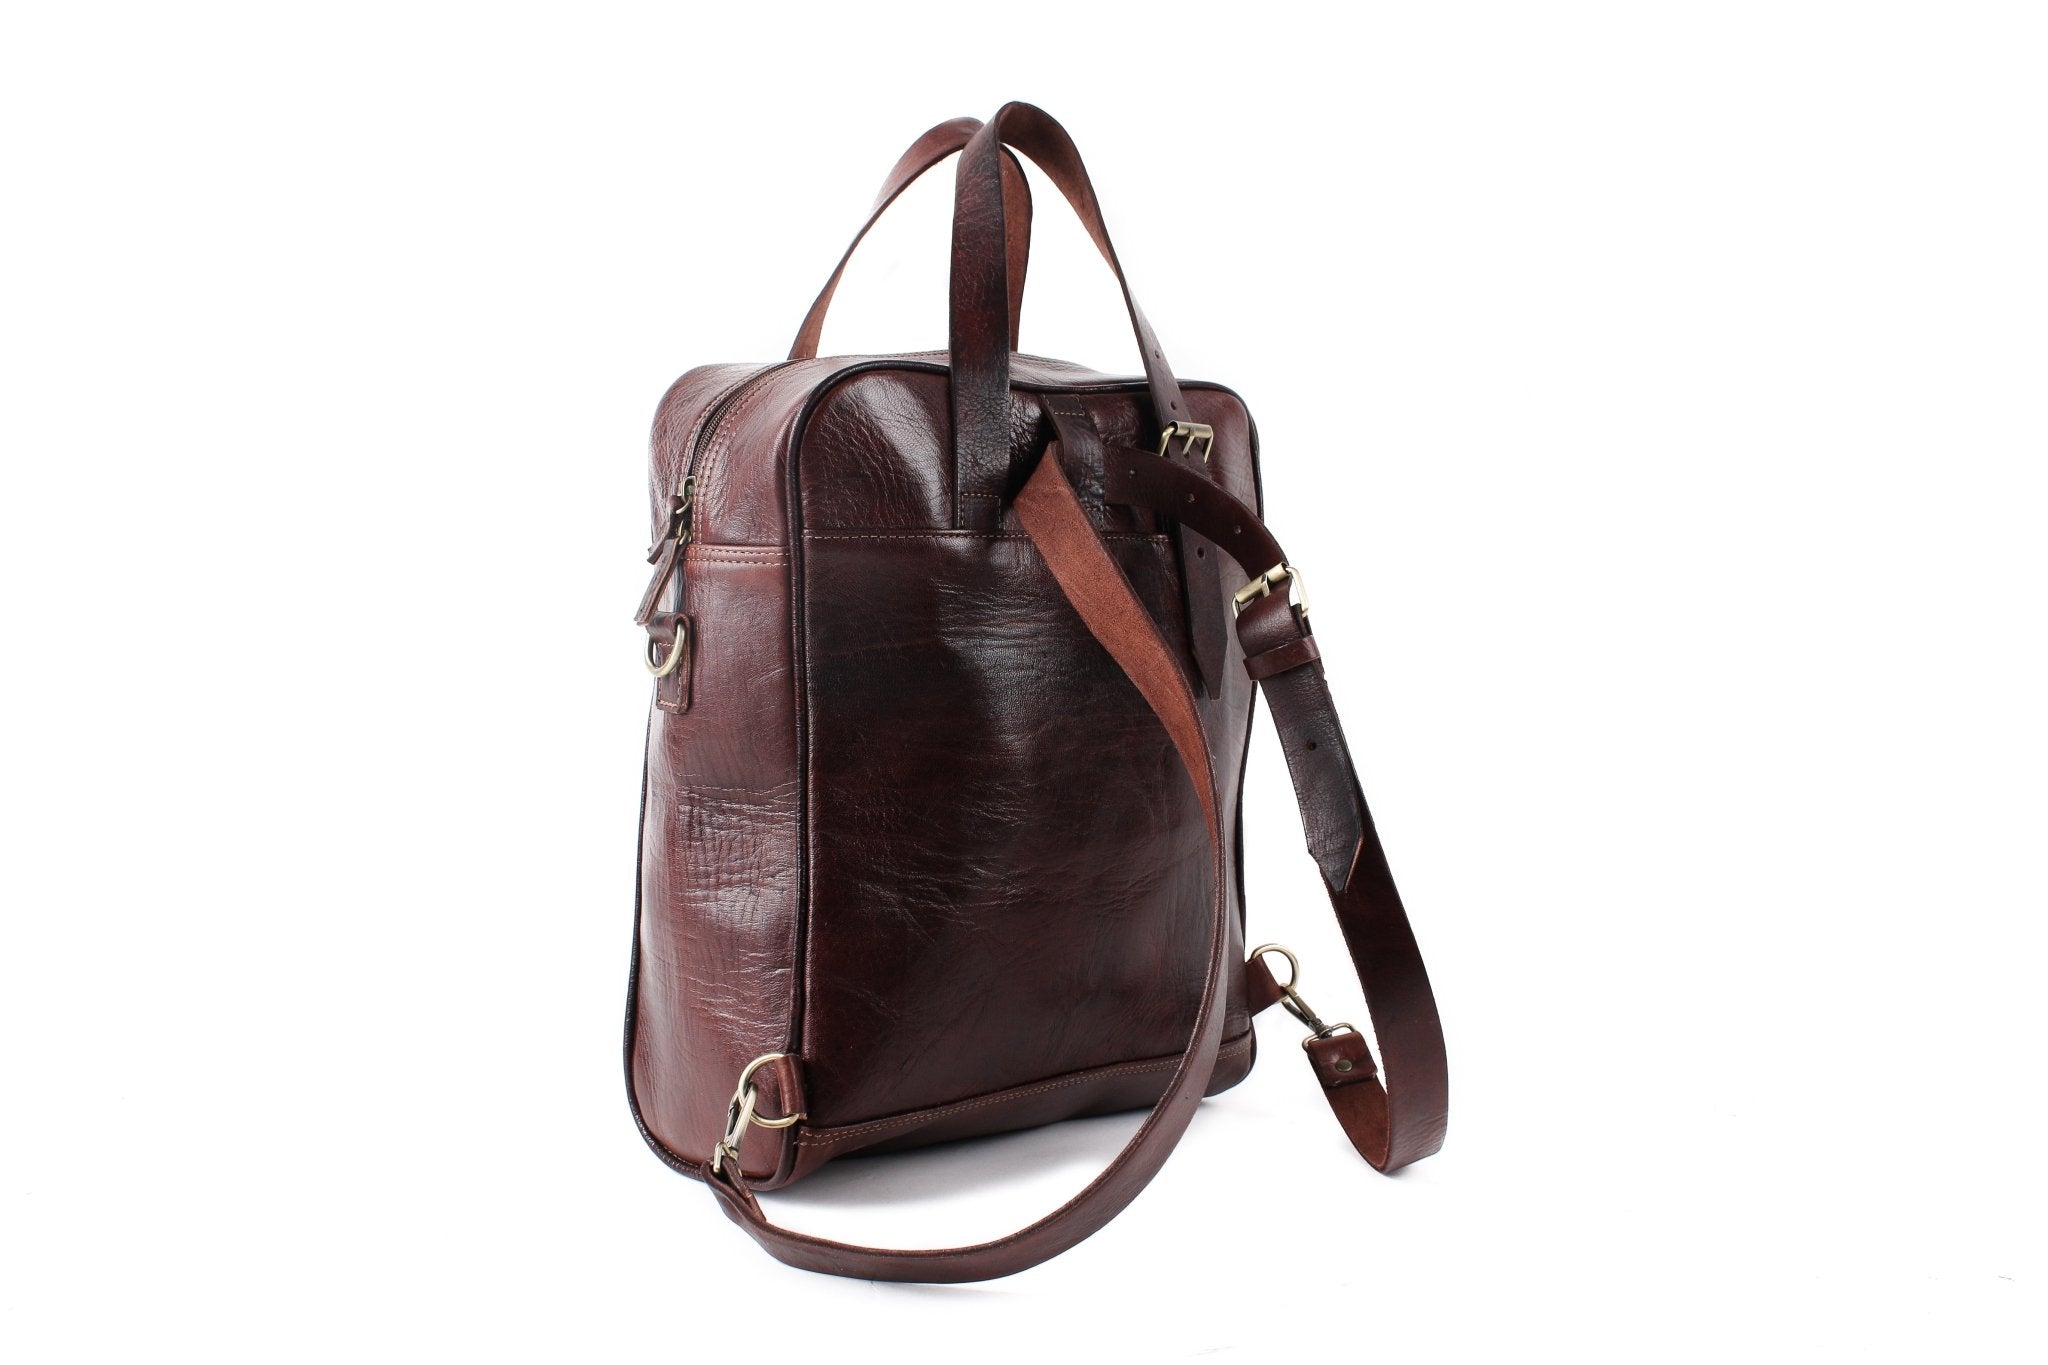 Nomad Chocolate Leather Travel Backpack - Artisan Stories